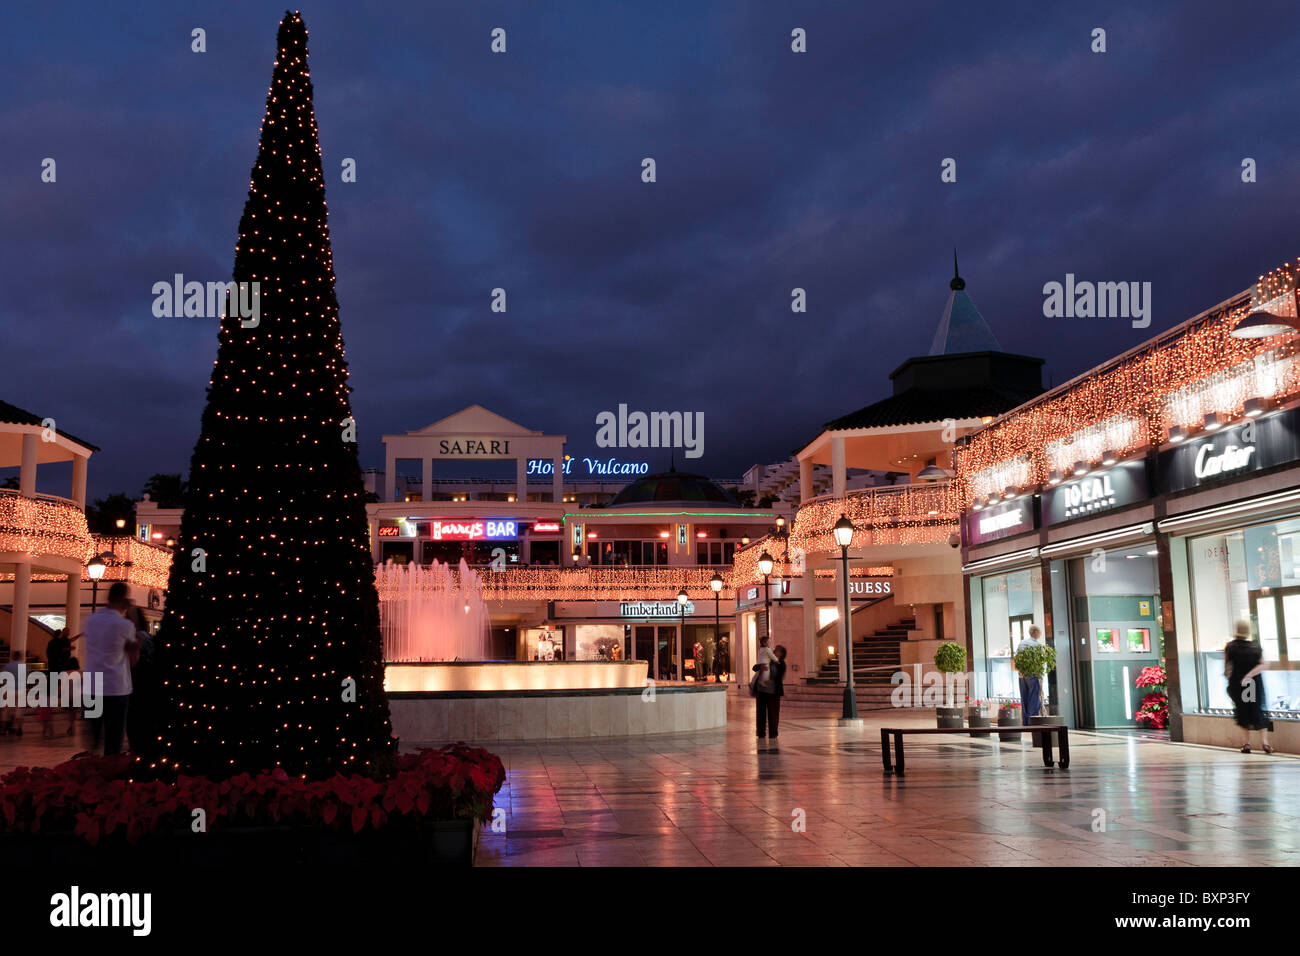 Christmas tree at the Safari shopping centre in Las Americas Tenerife  Canary Islands Spain Stock Photo - Alamy